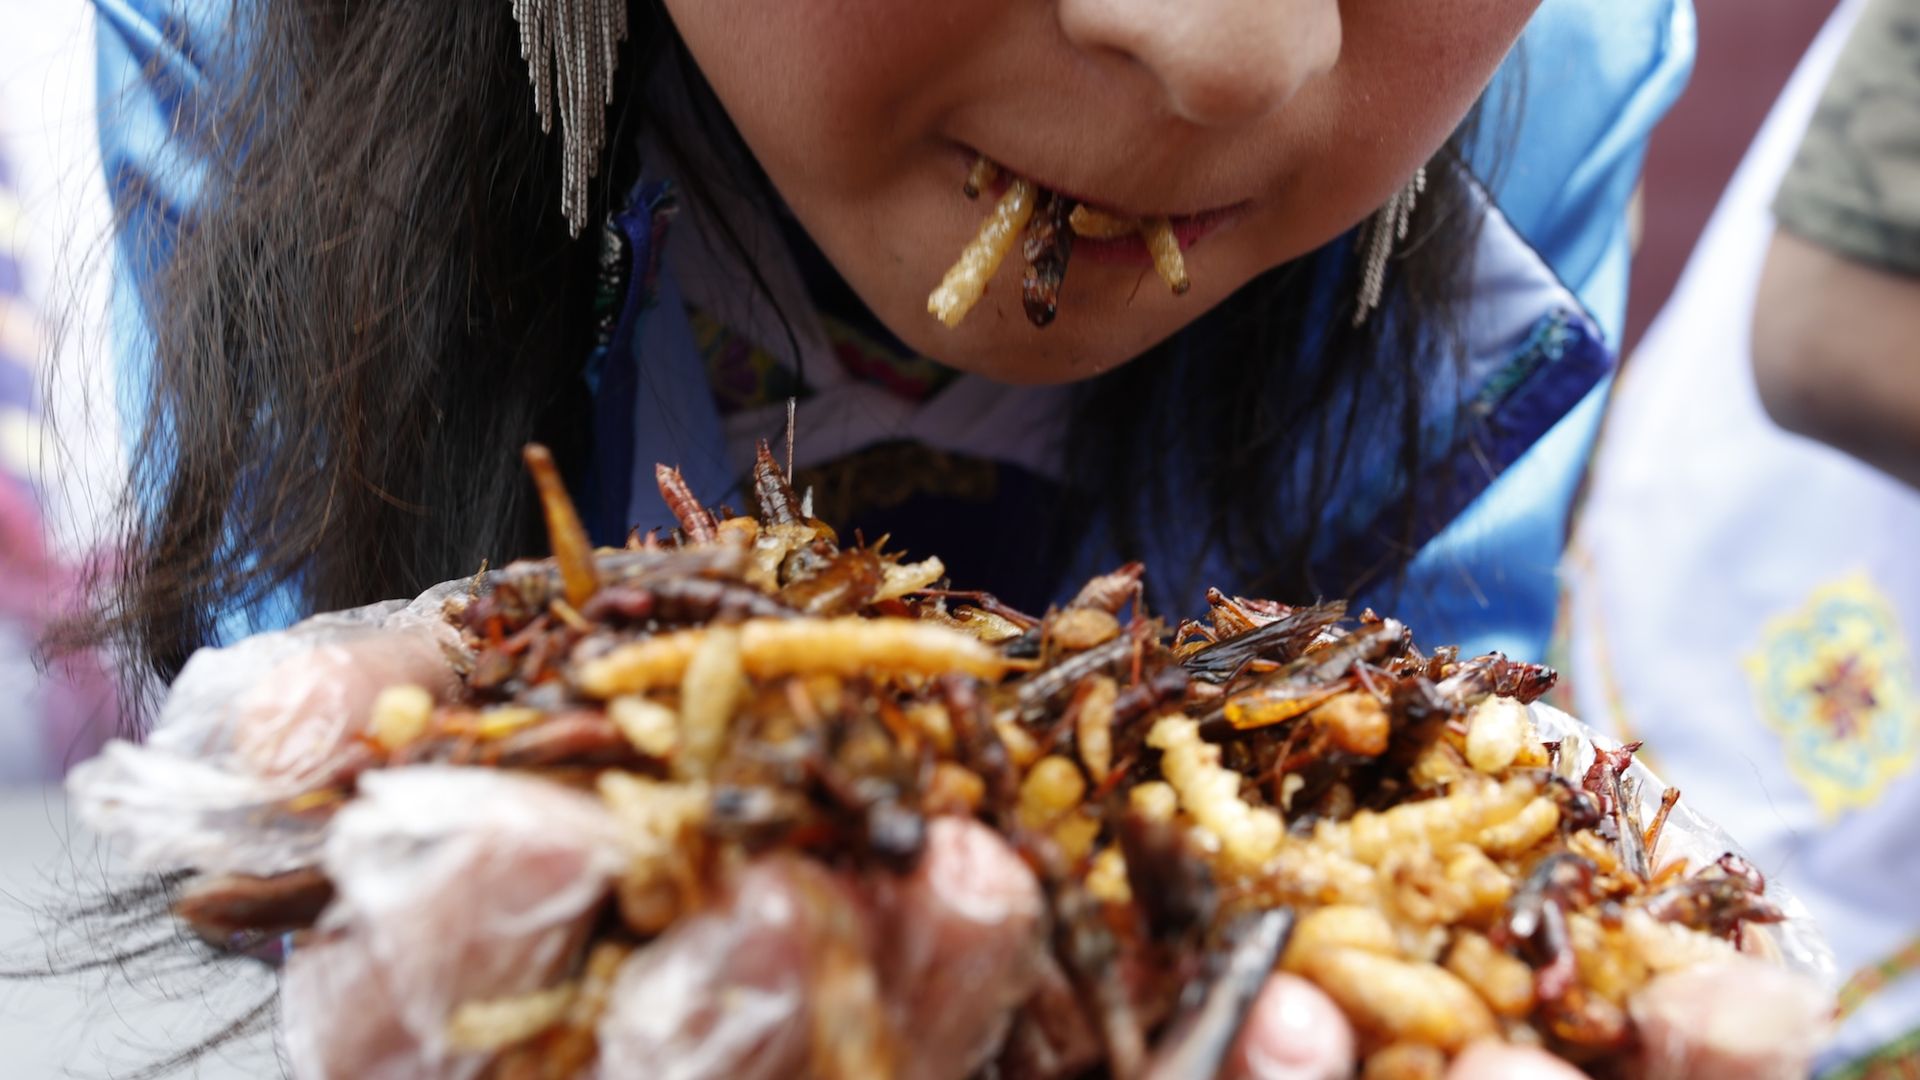 A woman eats insects in Yunnan, China